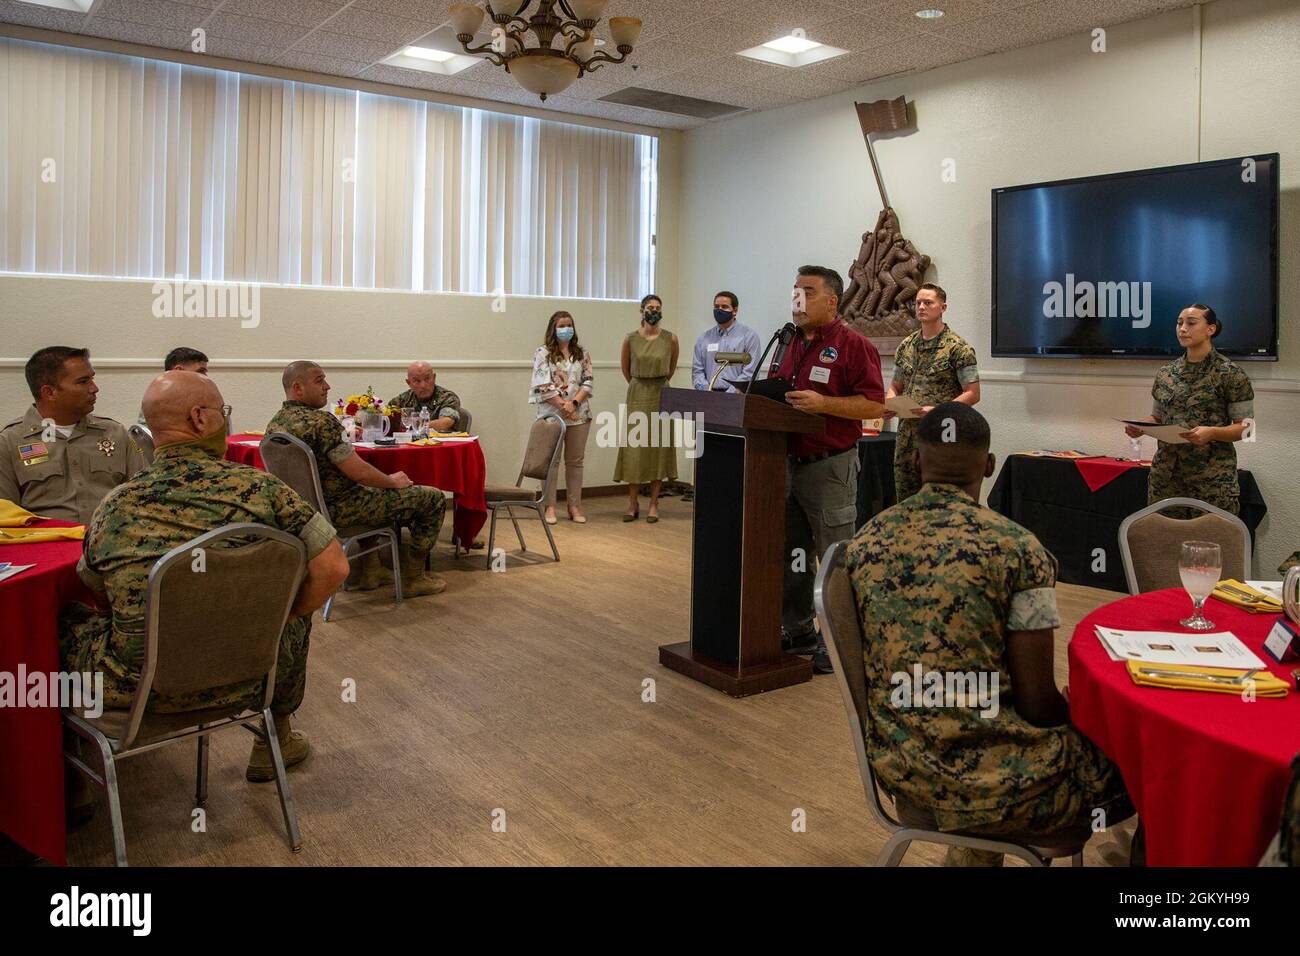 Daniel Mintz Sr., Mayor of the City of Twentynine Palms, speaks to guests during a Servicemembers of the Quarter Honoree Luncheon at Marine Corps Air Ground Combat Center, Twentynine Palms, California, July 29, 2021. The event was hosted by the Armed Services Young Men’s Christian Association Twentynine Palms to congratulate the honorees on their outstanding service over the spring quarter. Stock Photo